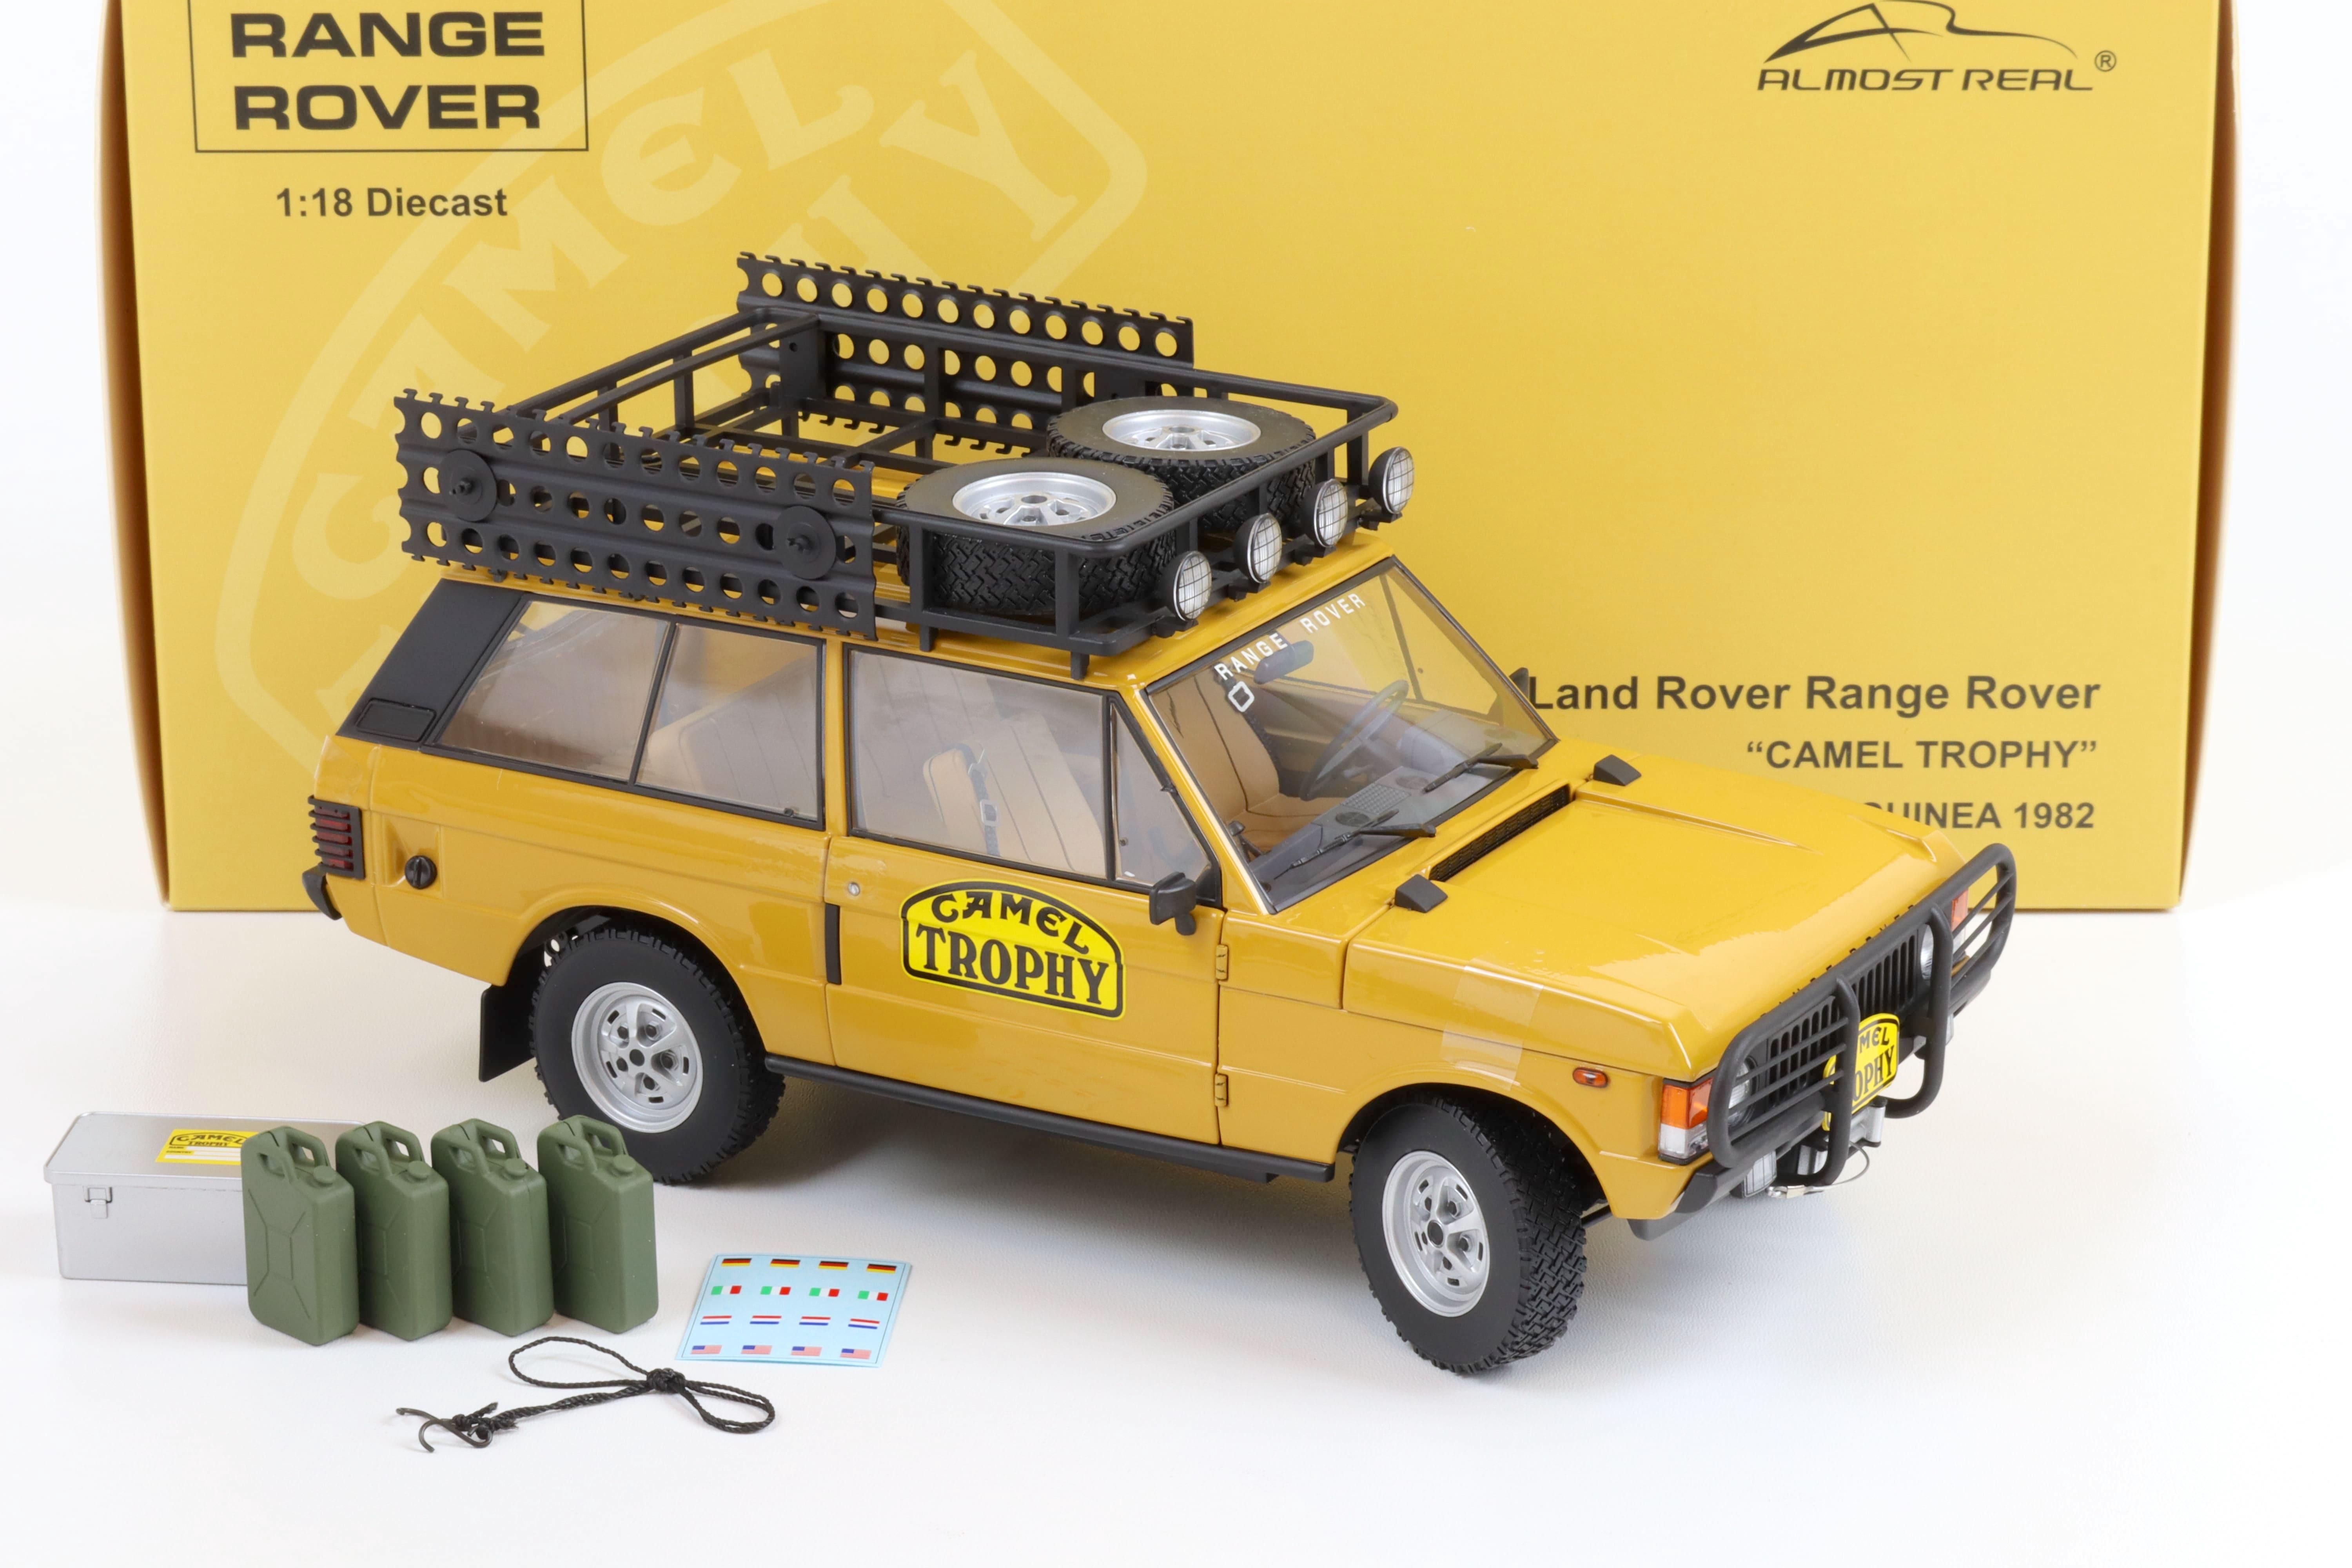 1:18 Almost Real Land Rover Range Rover "Camel Trophy" Papua New Guinea 1982